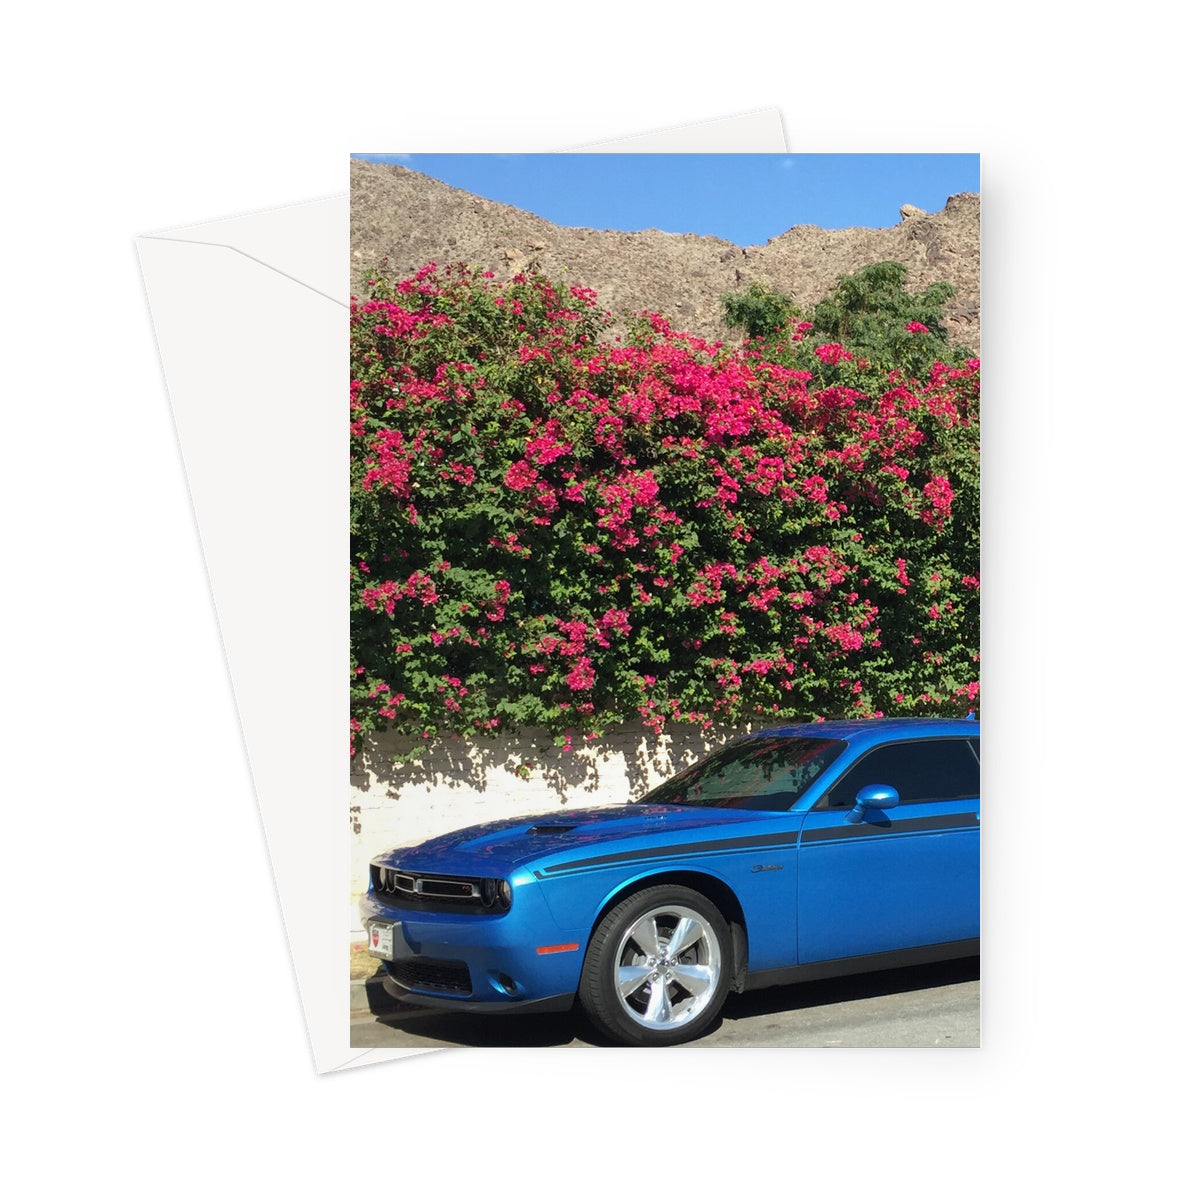 Blue Mustang car parked against a pale wall, which is overhung with a cerise flowering bush. In the distance are the brown mountains and azure blue sky of Palm Springs, California, in this greeting card